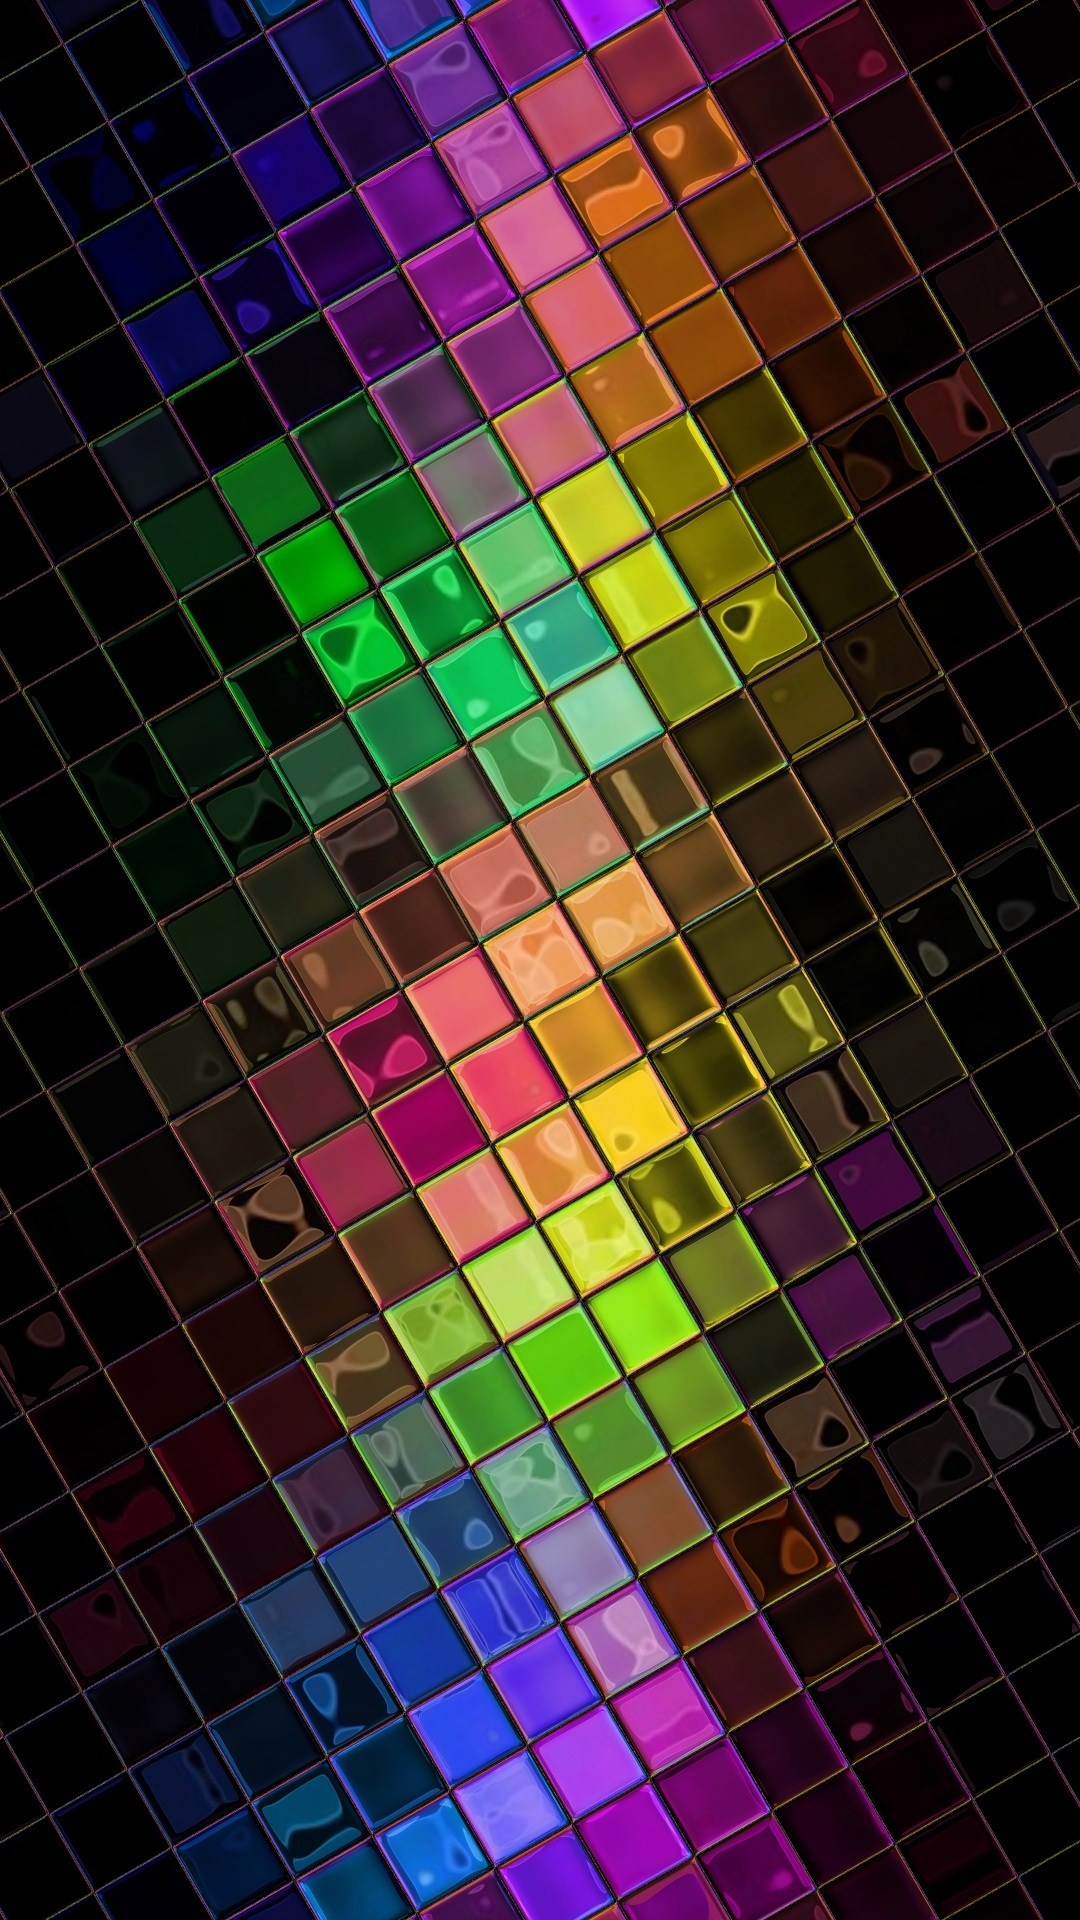 Colorful Squares In Hd Wallpapers - 1080p Phone Backgrounds - HD Wallpaper 